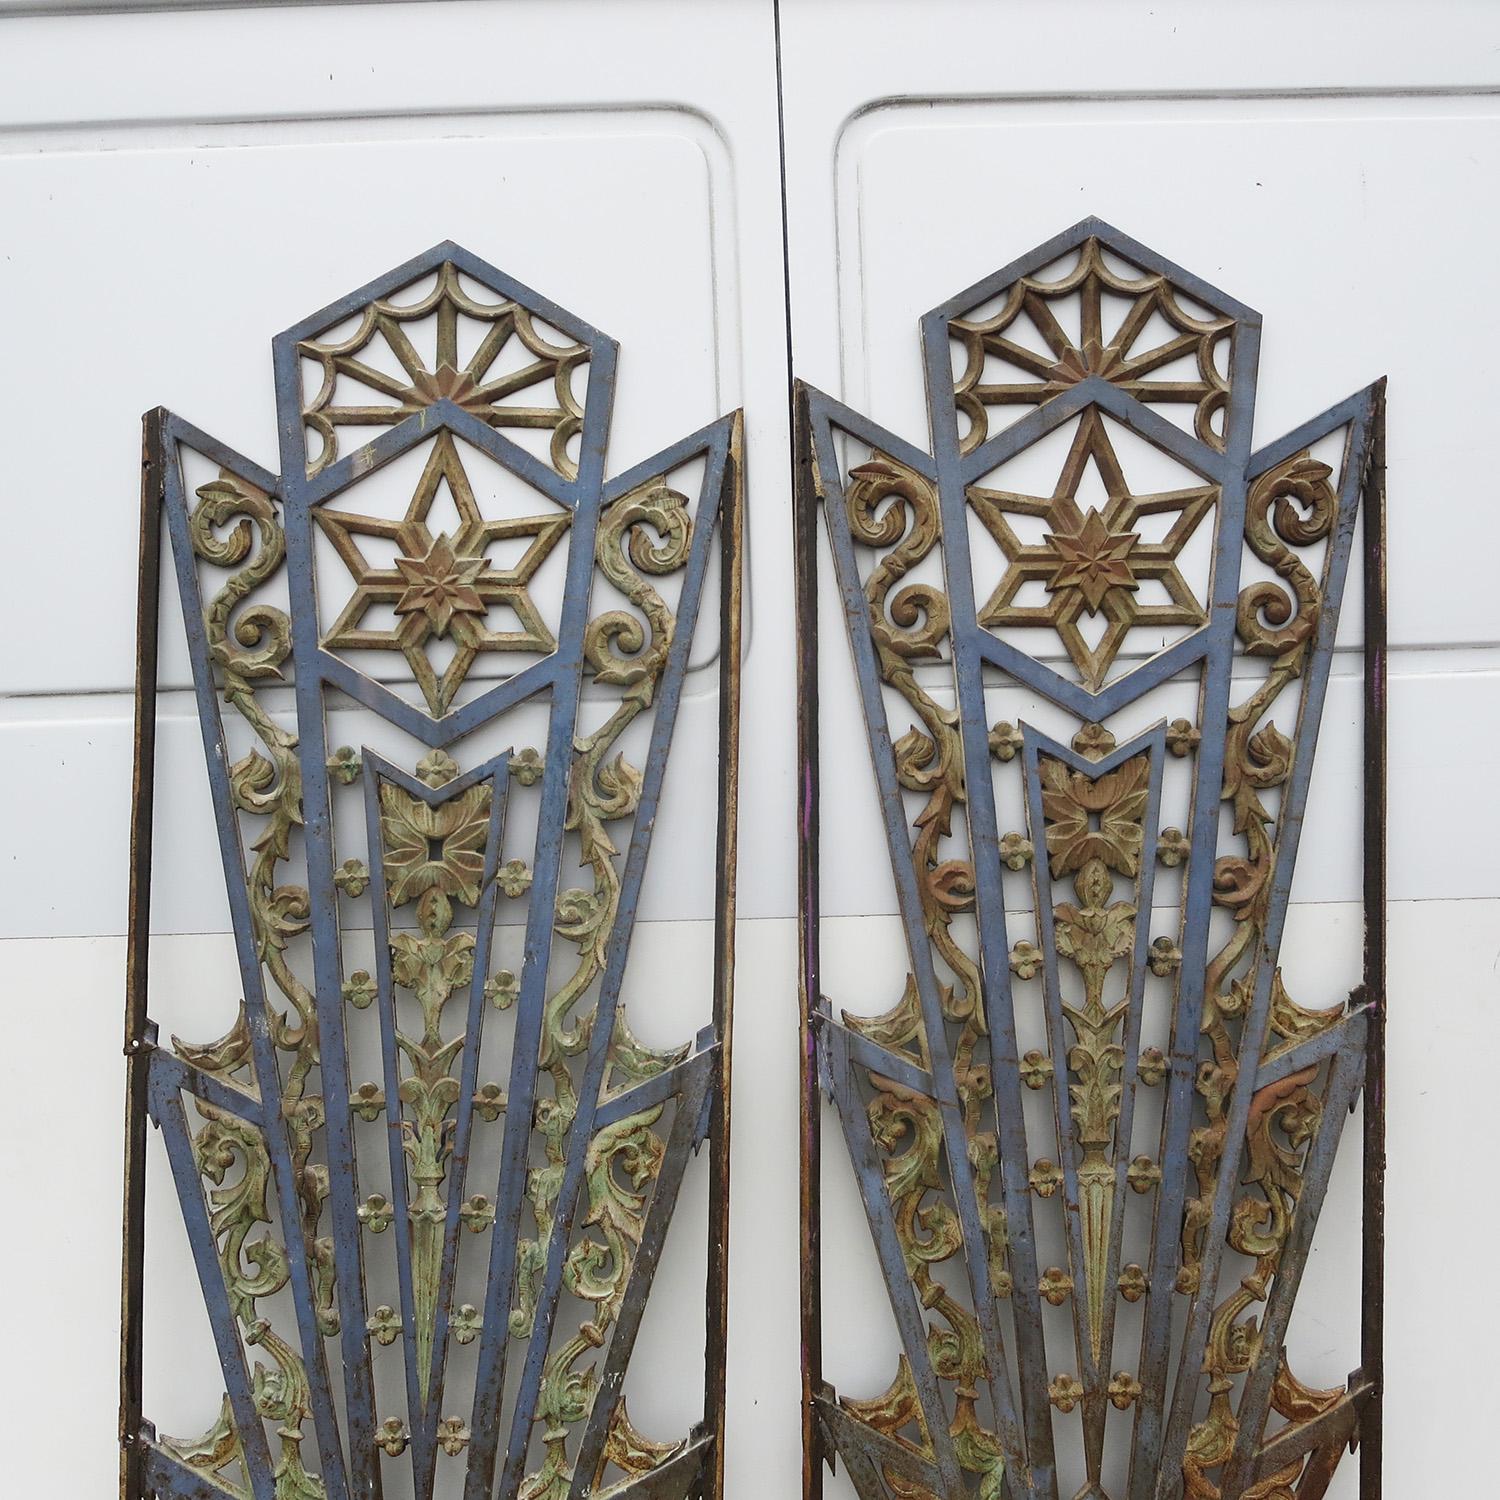 These incredible grates came off of a Los Angeles area building from the 1930s. They show a wonderful overall patina in a two toned finish. Each grate has flat bars on the left and right with mounting holes for easy installation. They can be used in